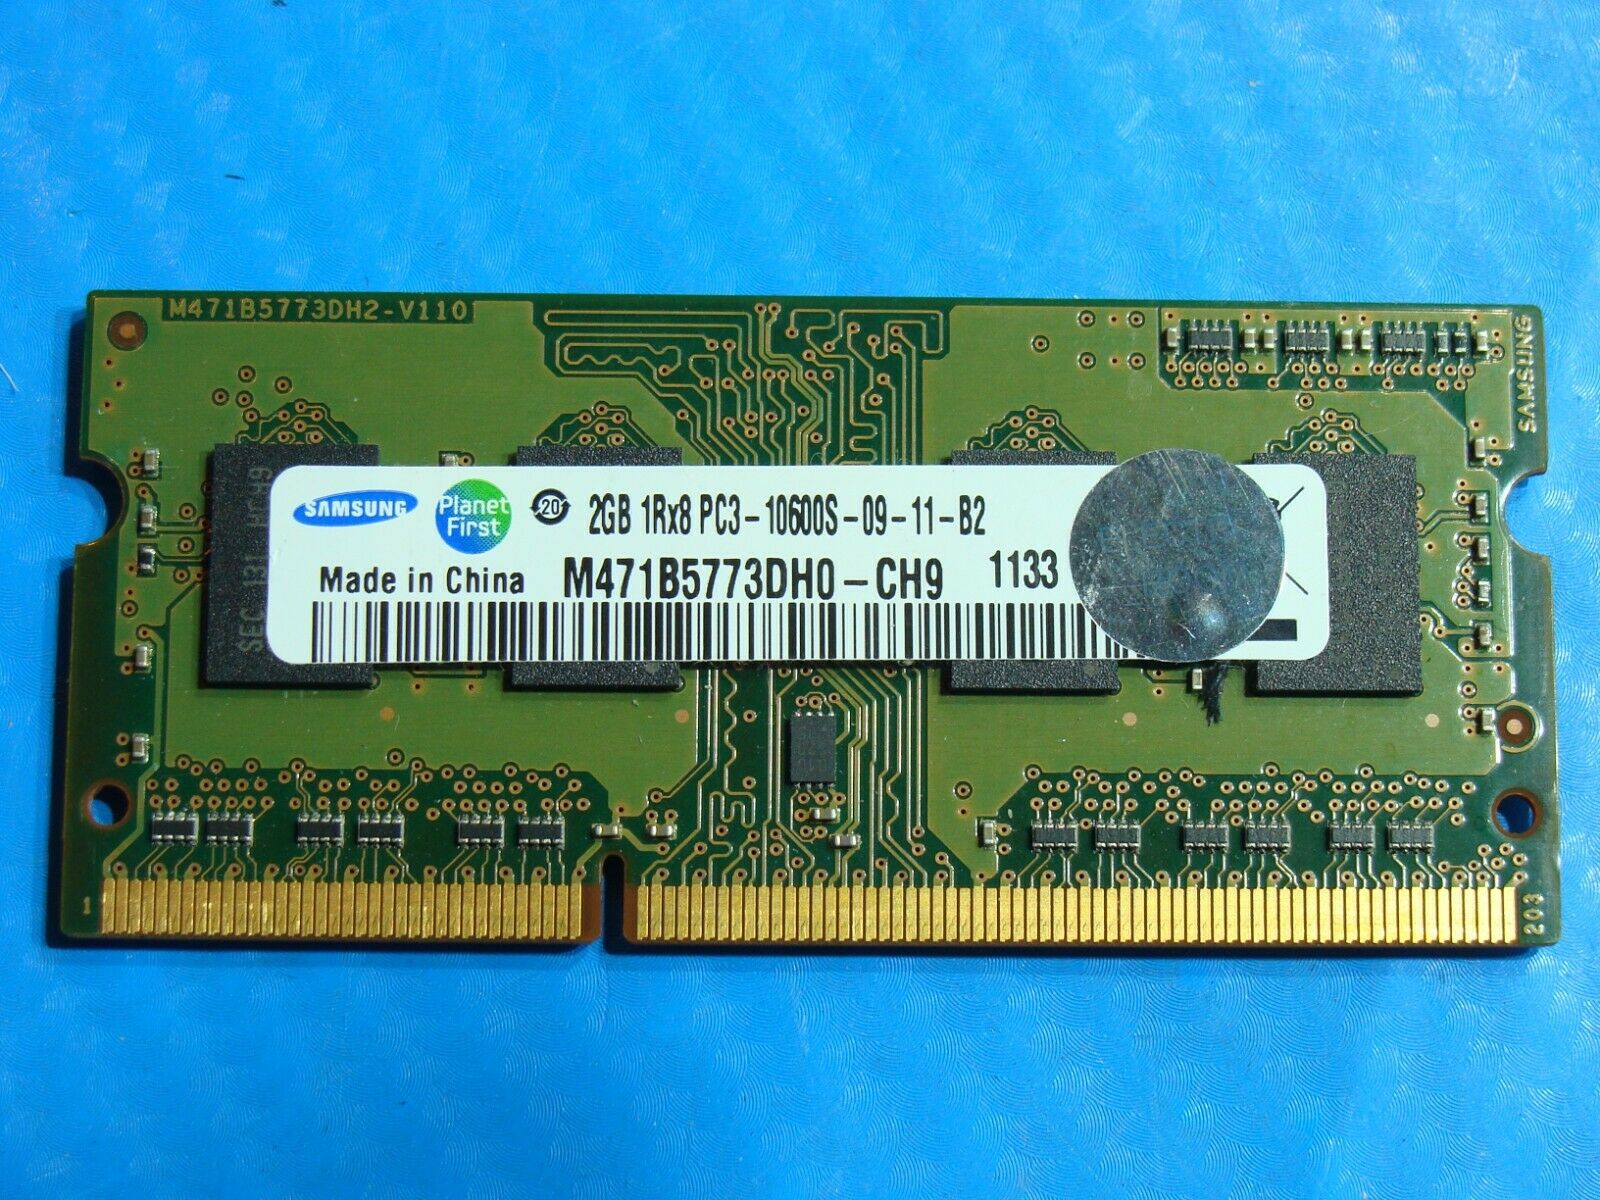 MacBook Pro A1278 Samsung 2GB SO-DIMM PC3-10600S Memory RAM M471B5773DH0-CH9 - Laptop Parts - Buy Authentic Computer Parts - Top Seller Ebay